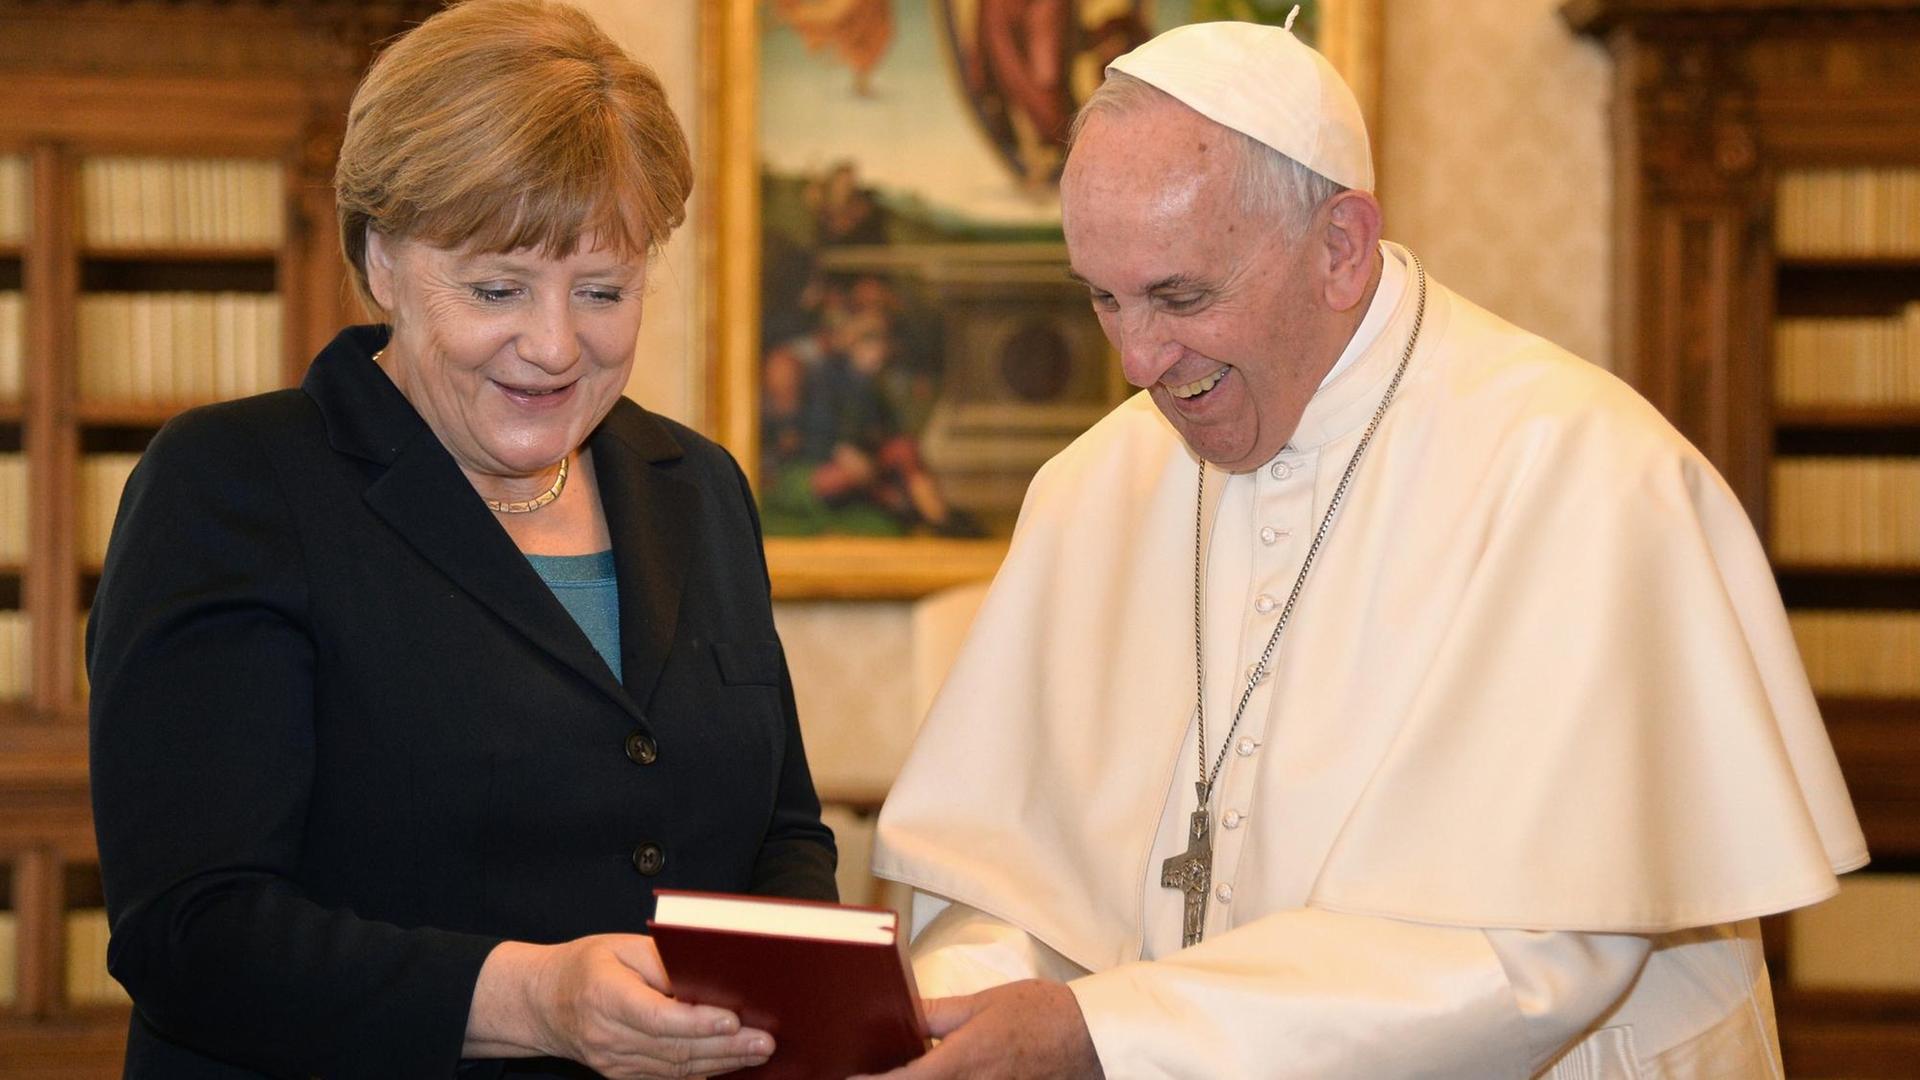 German Chancellor Angela Merkel (L) exchanges gifts with Pope Francis during a private audience on May 6, 2016 at the Vatican. Merkel is in Rome to take part in a ceremony for the awarding of Germany's famed Charlemagne Prize to Pope Francis, given to public figures in recognition of contribution to European unity. / AFP PHOTO / ALBERTO PIZZOLI